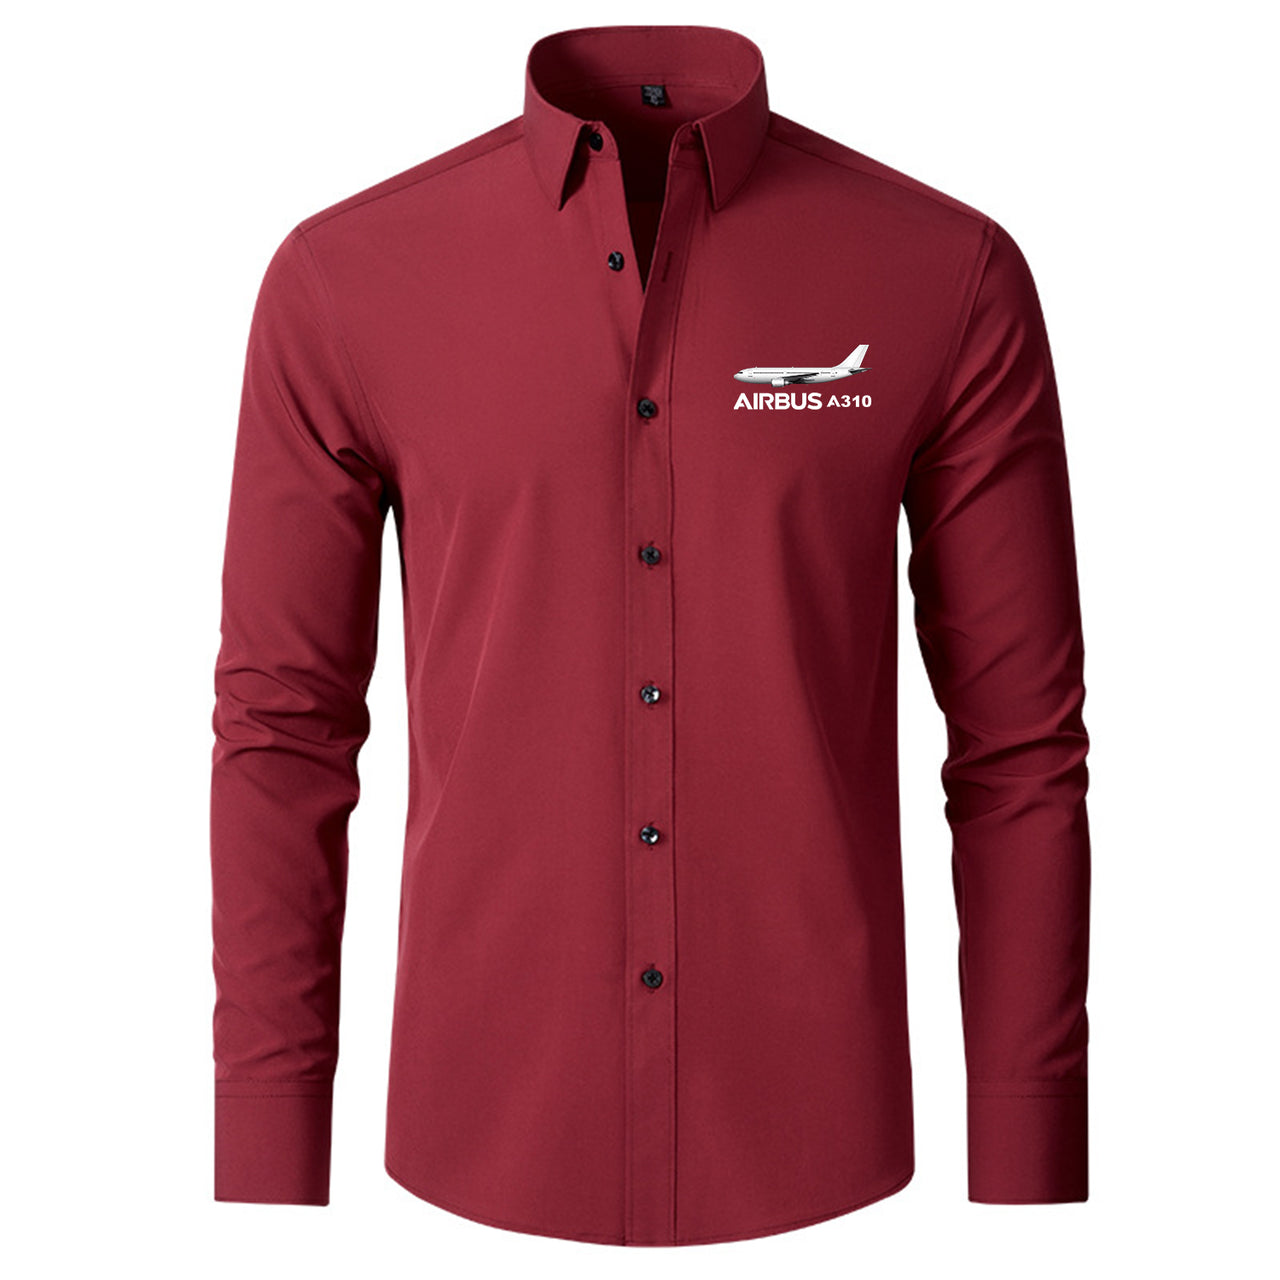 The Airbus A310 Designed Long Sleeve Shirts